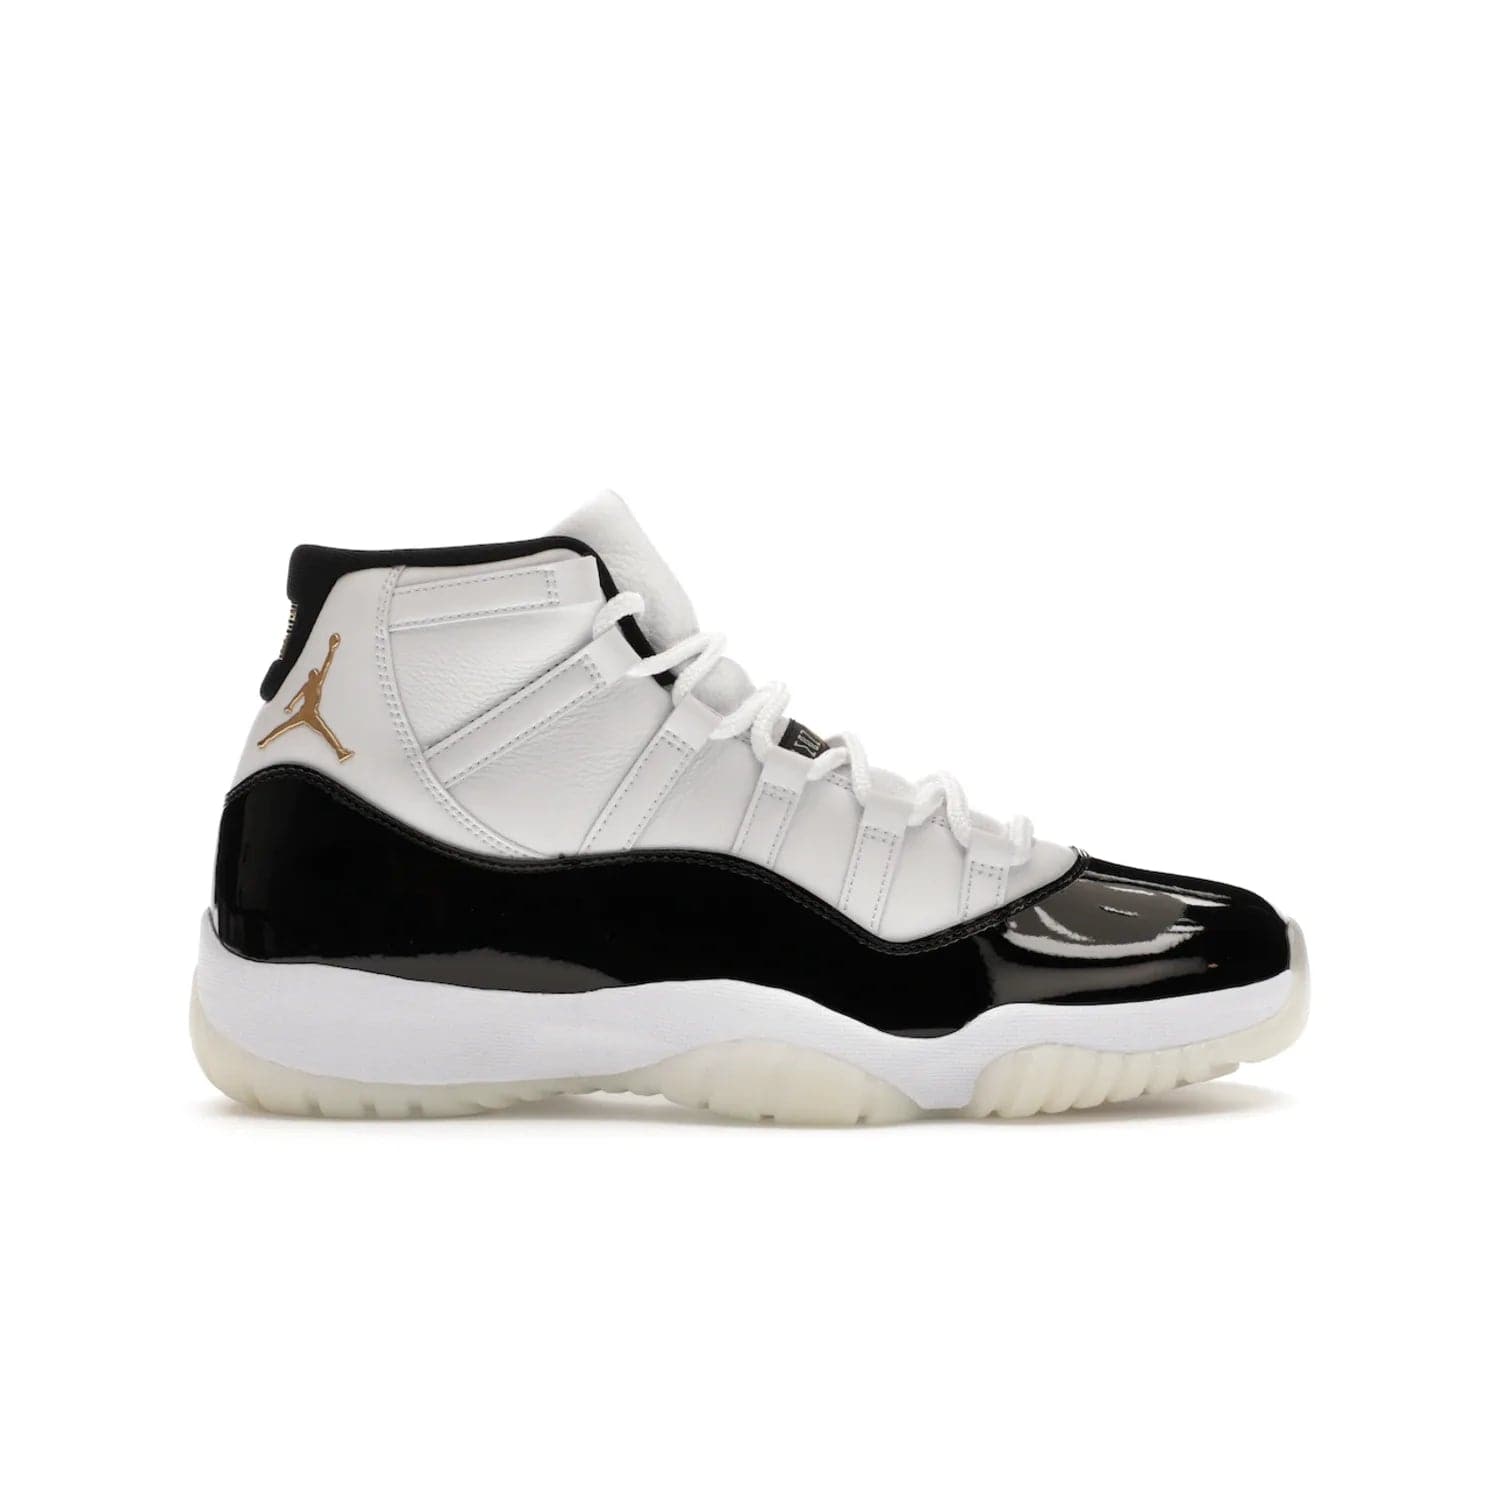 Jordan 11 Retro DMP Gratitude (2023) - Image 1 - Only at www.BallersClubKickz.com - Shop the legendary Jordan 11 Retro Gratitude Defining Moments (2023). This iconic sneaker features the classic Defining Moments colorway, high-cut patent leather upper, white midsole, black translucent rubber outsole, and Metallic Gold accents. Available December 9, 2023.